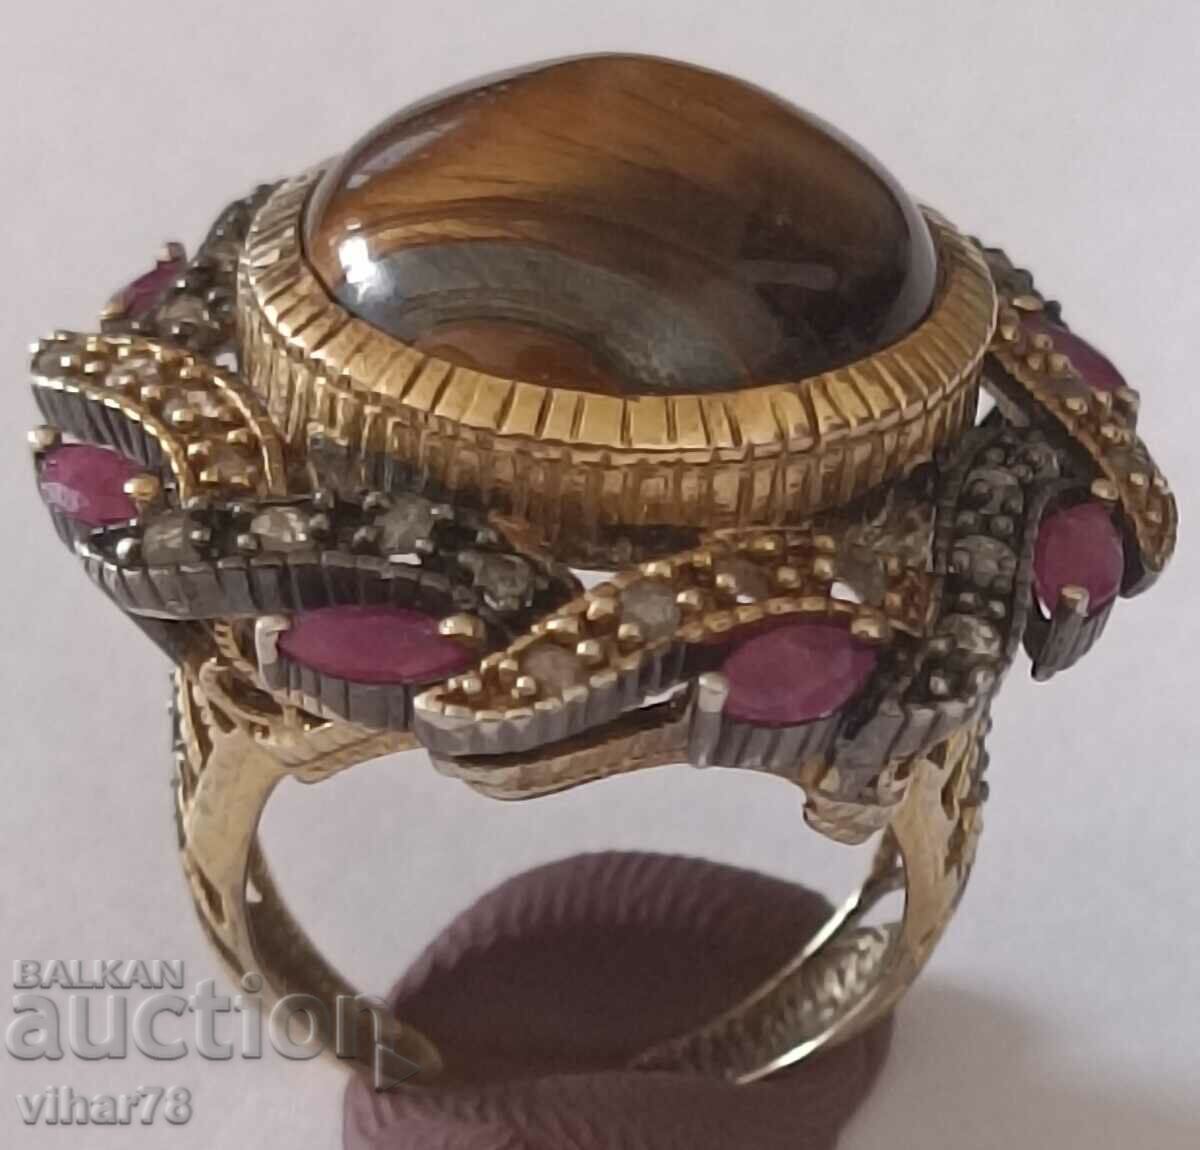 Ring with tiger's eye, diamond - made of 9 carat gold and with